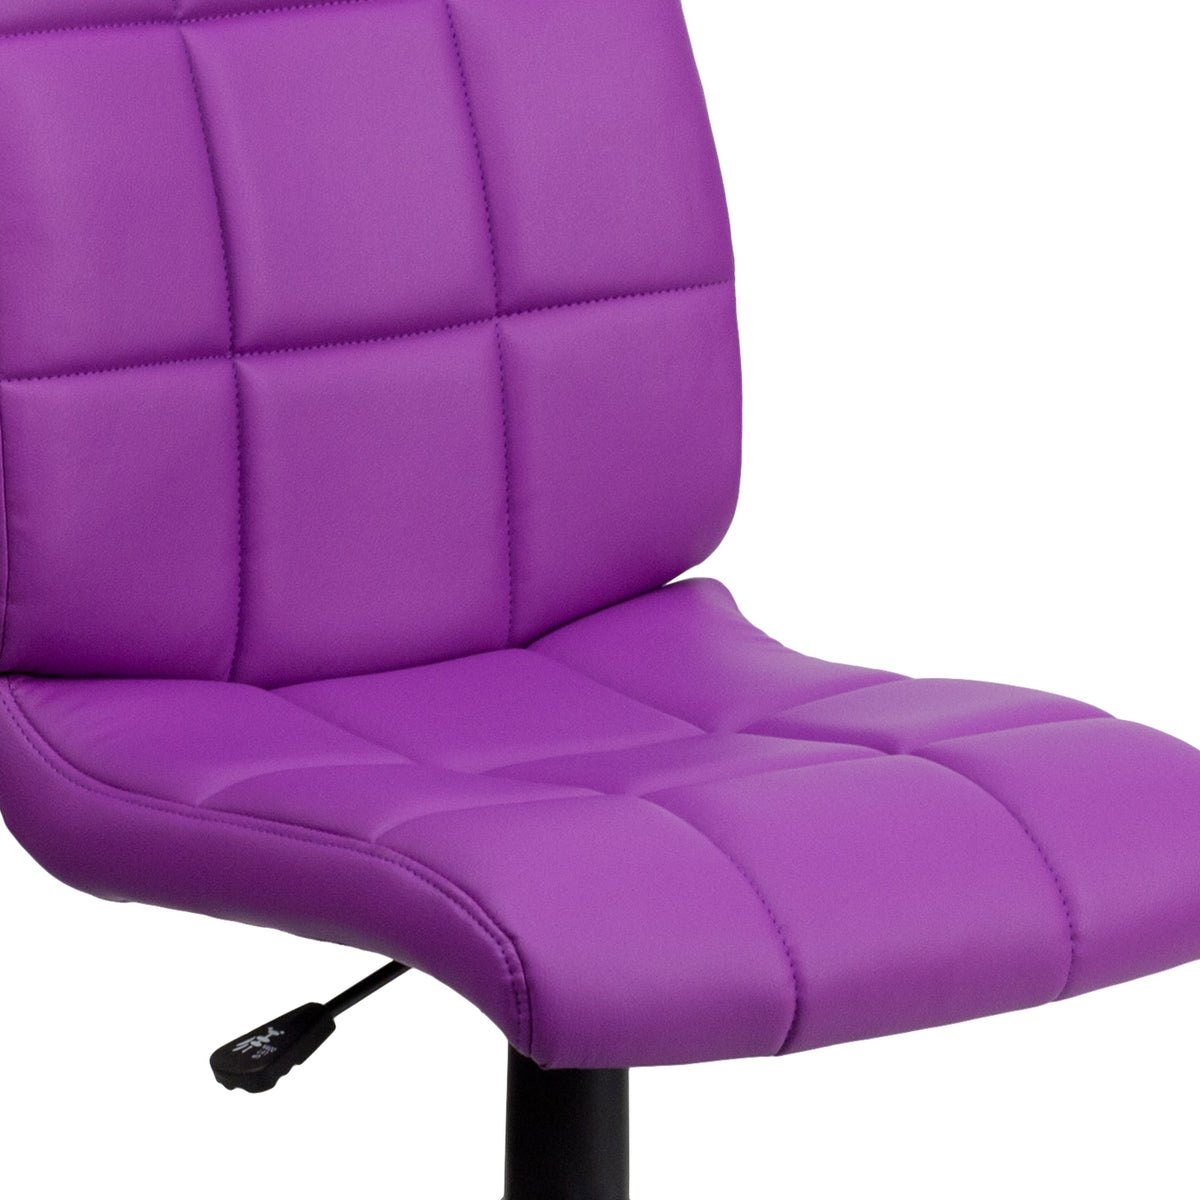 Purple |#| Mid-Back Purple Quilted Vinyl Swivel Task Office Chair - Home Office Chair